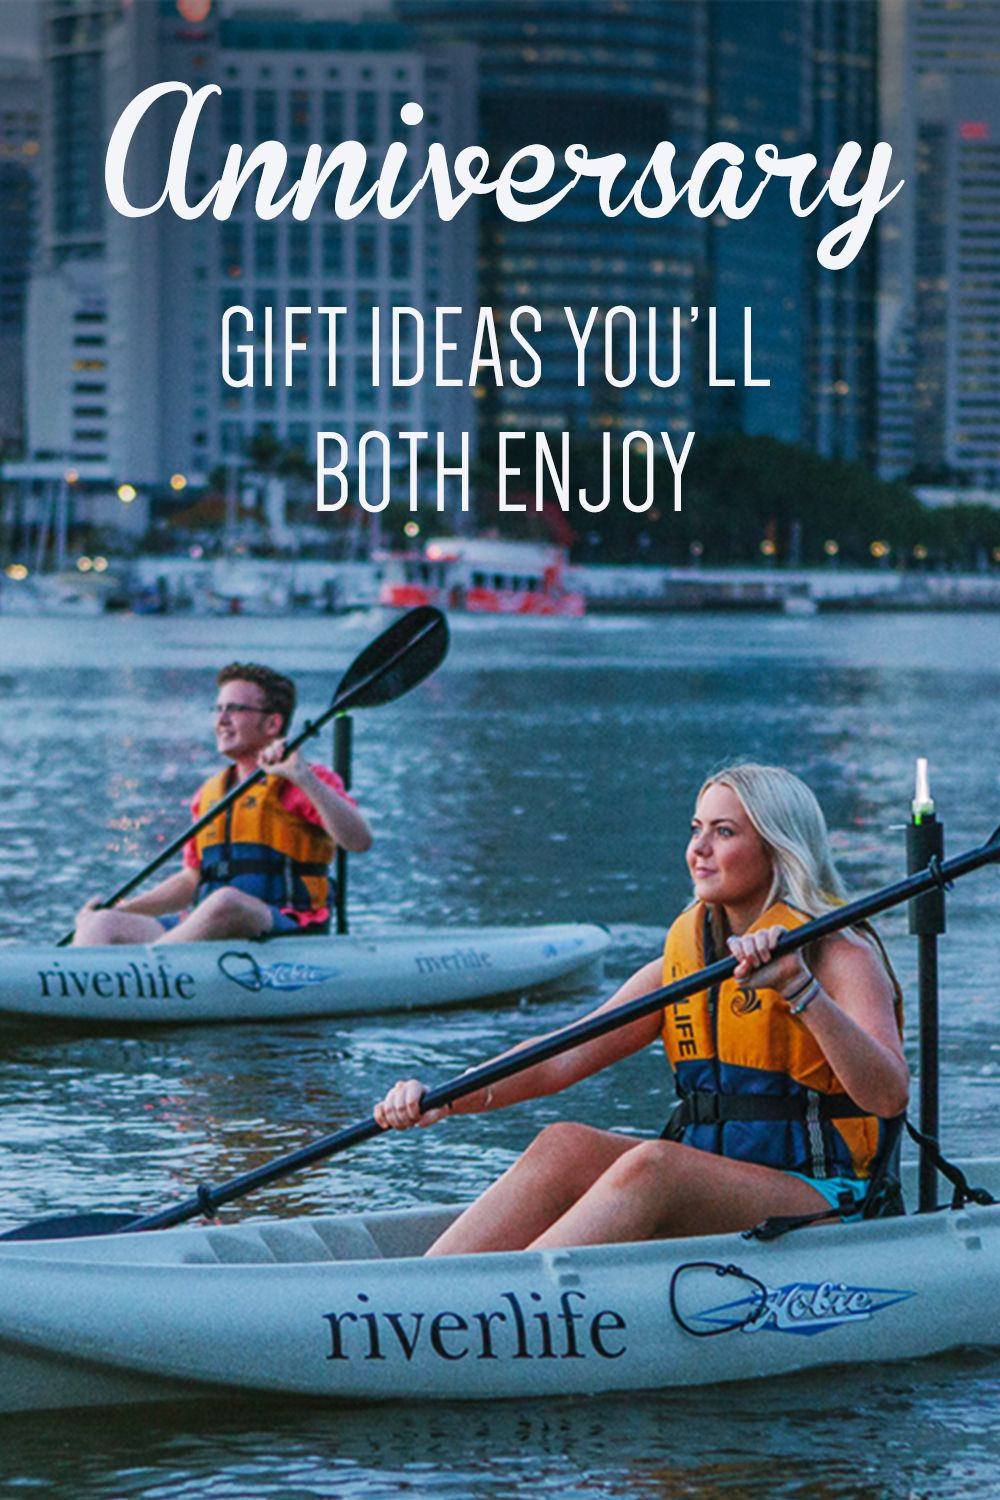 Experience Gift Ideas For Couples
 Easy Anniversary Gift Ideas That You Will Both Enjoy